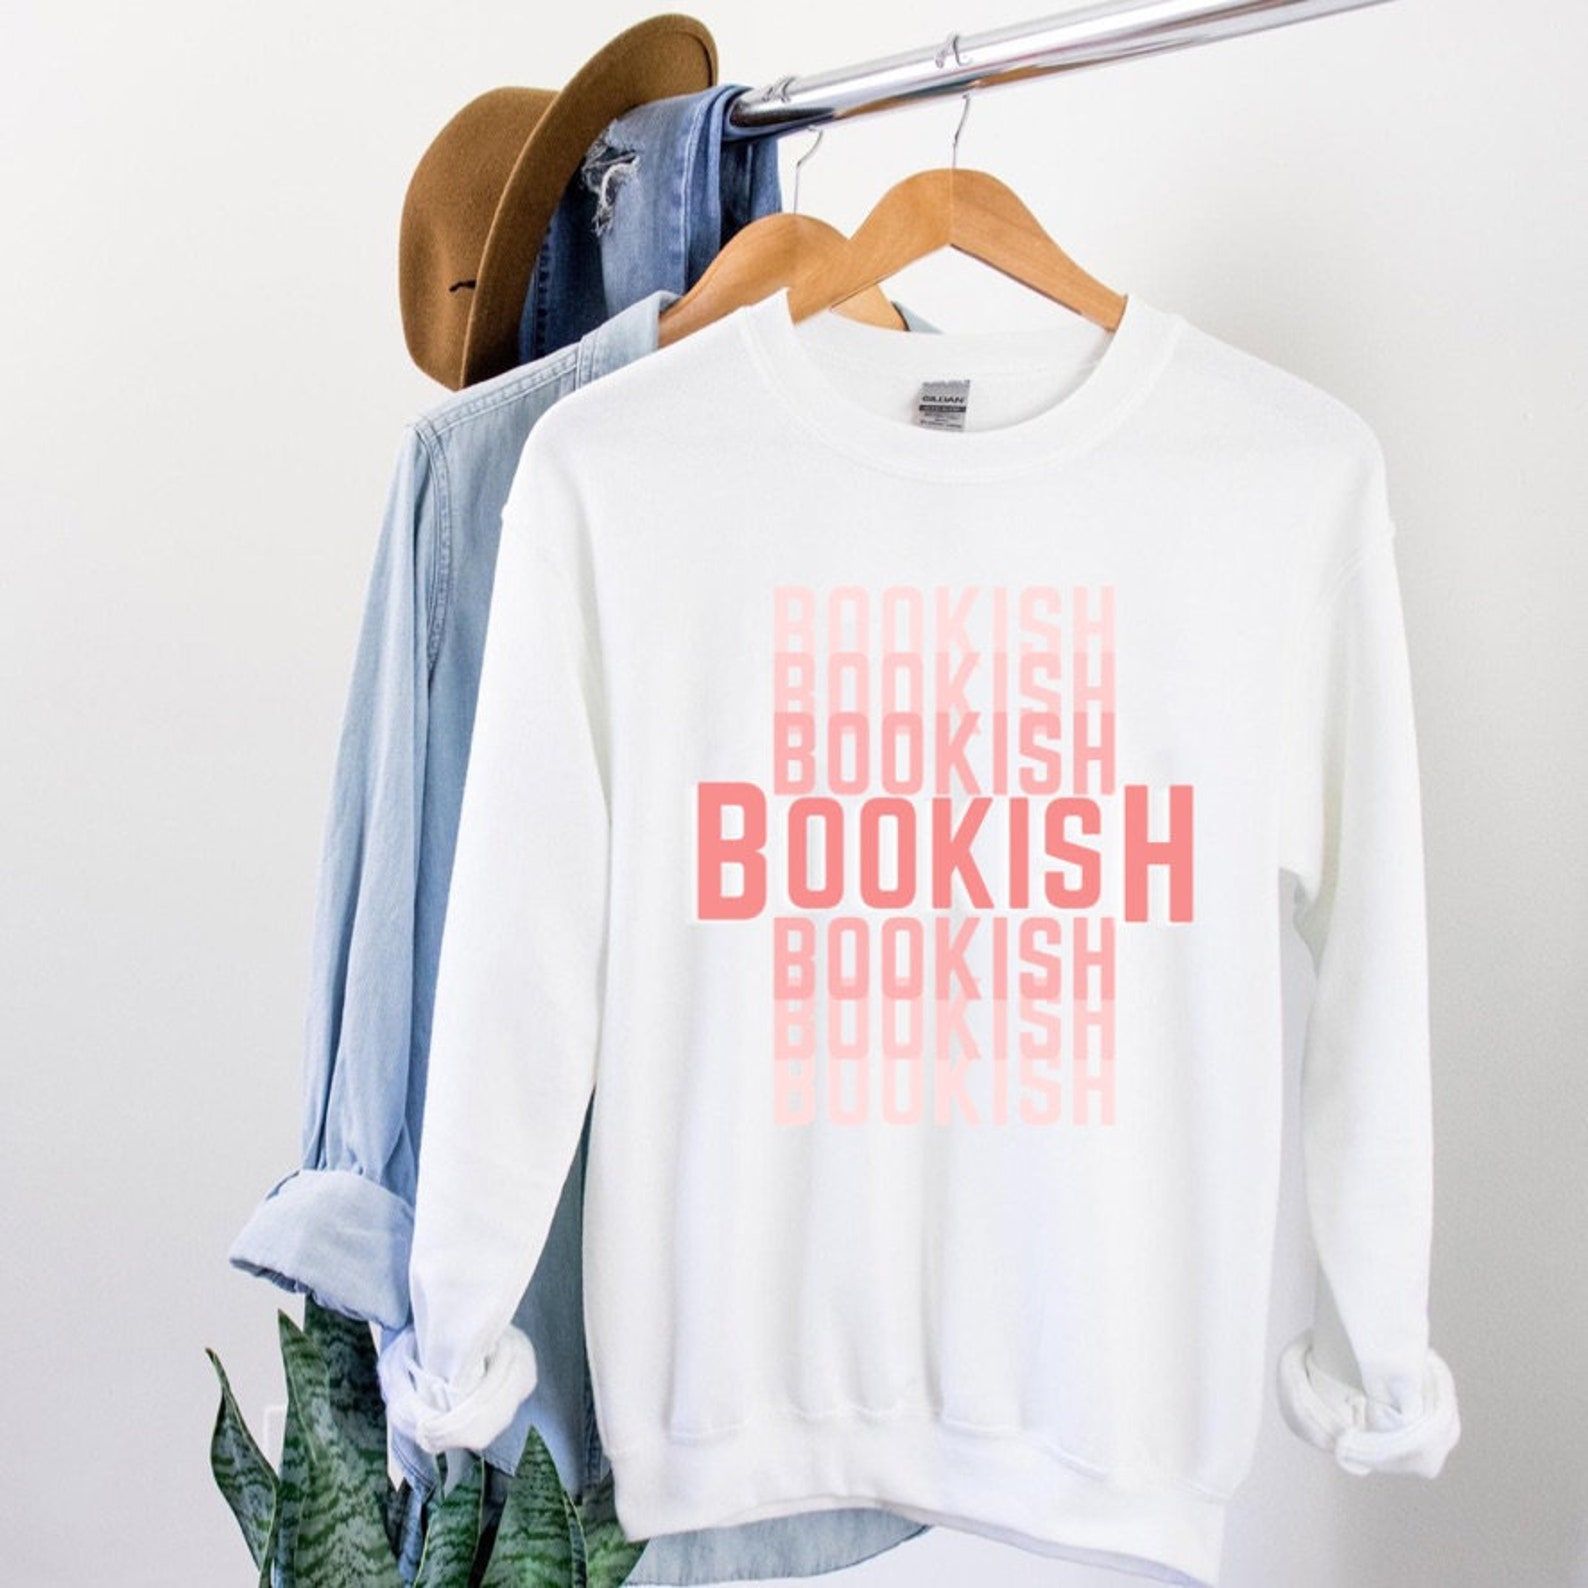 White sweatshirt with the word "Bookish" repeated in various pink shades. 